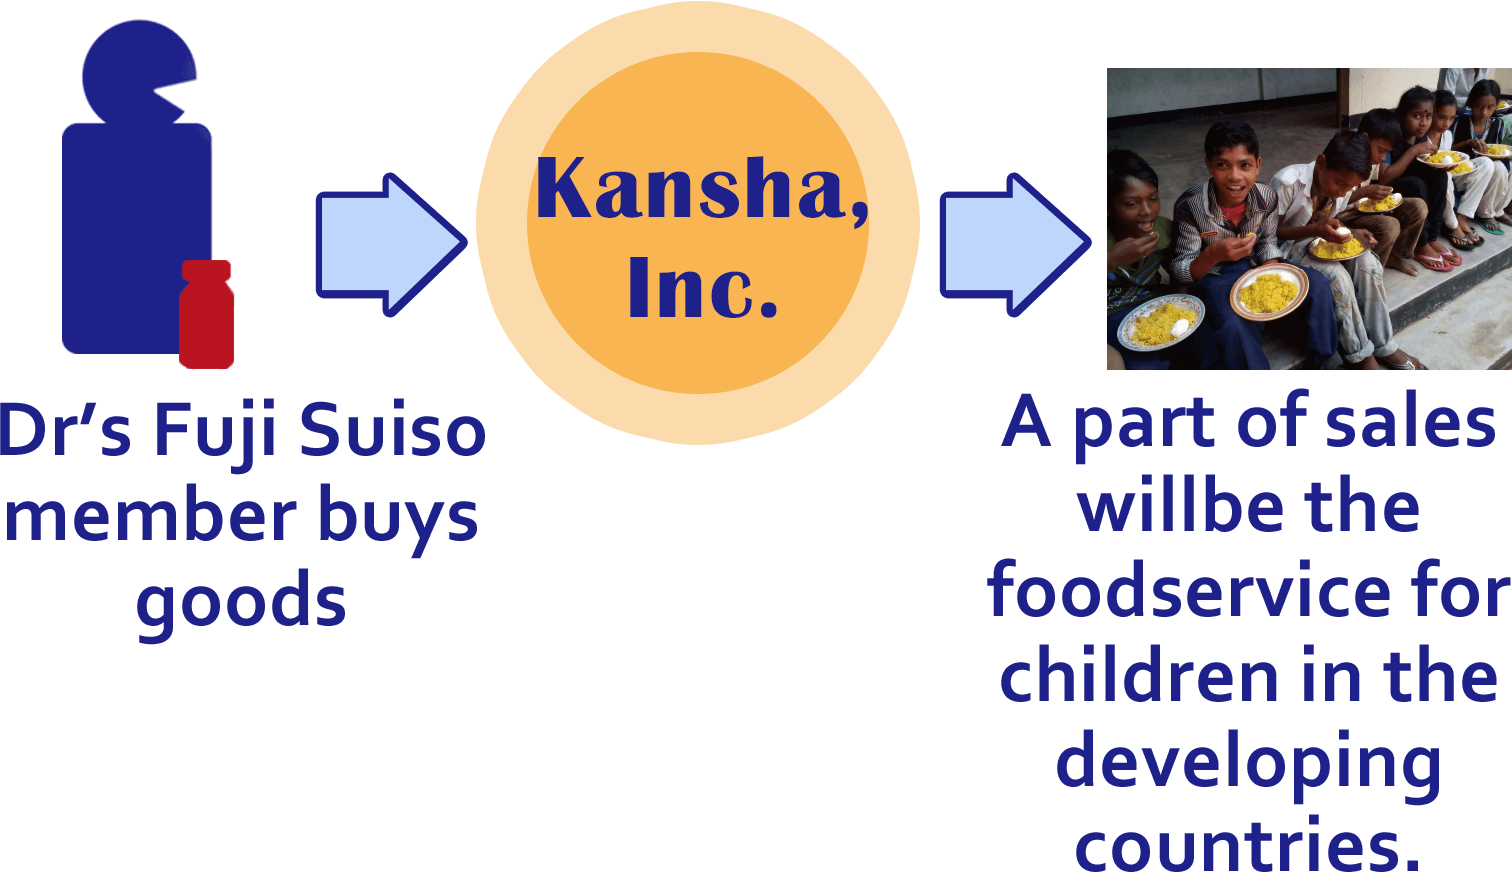 Dr's Fuji Suiso member buys goods → A part of sales will be the food service for children in the developing countries.